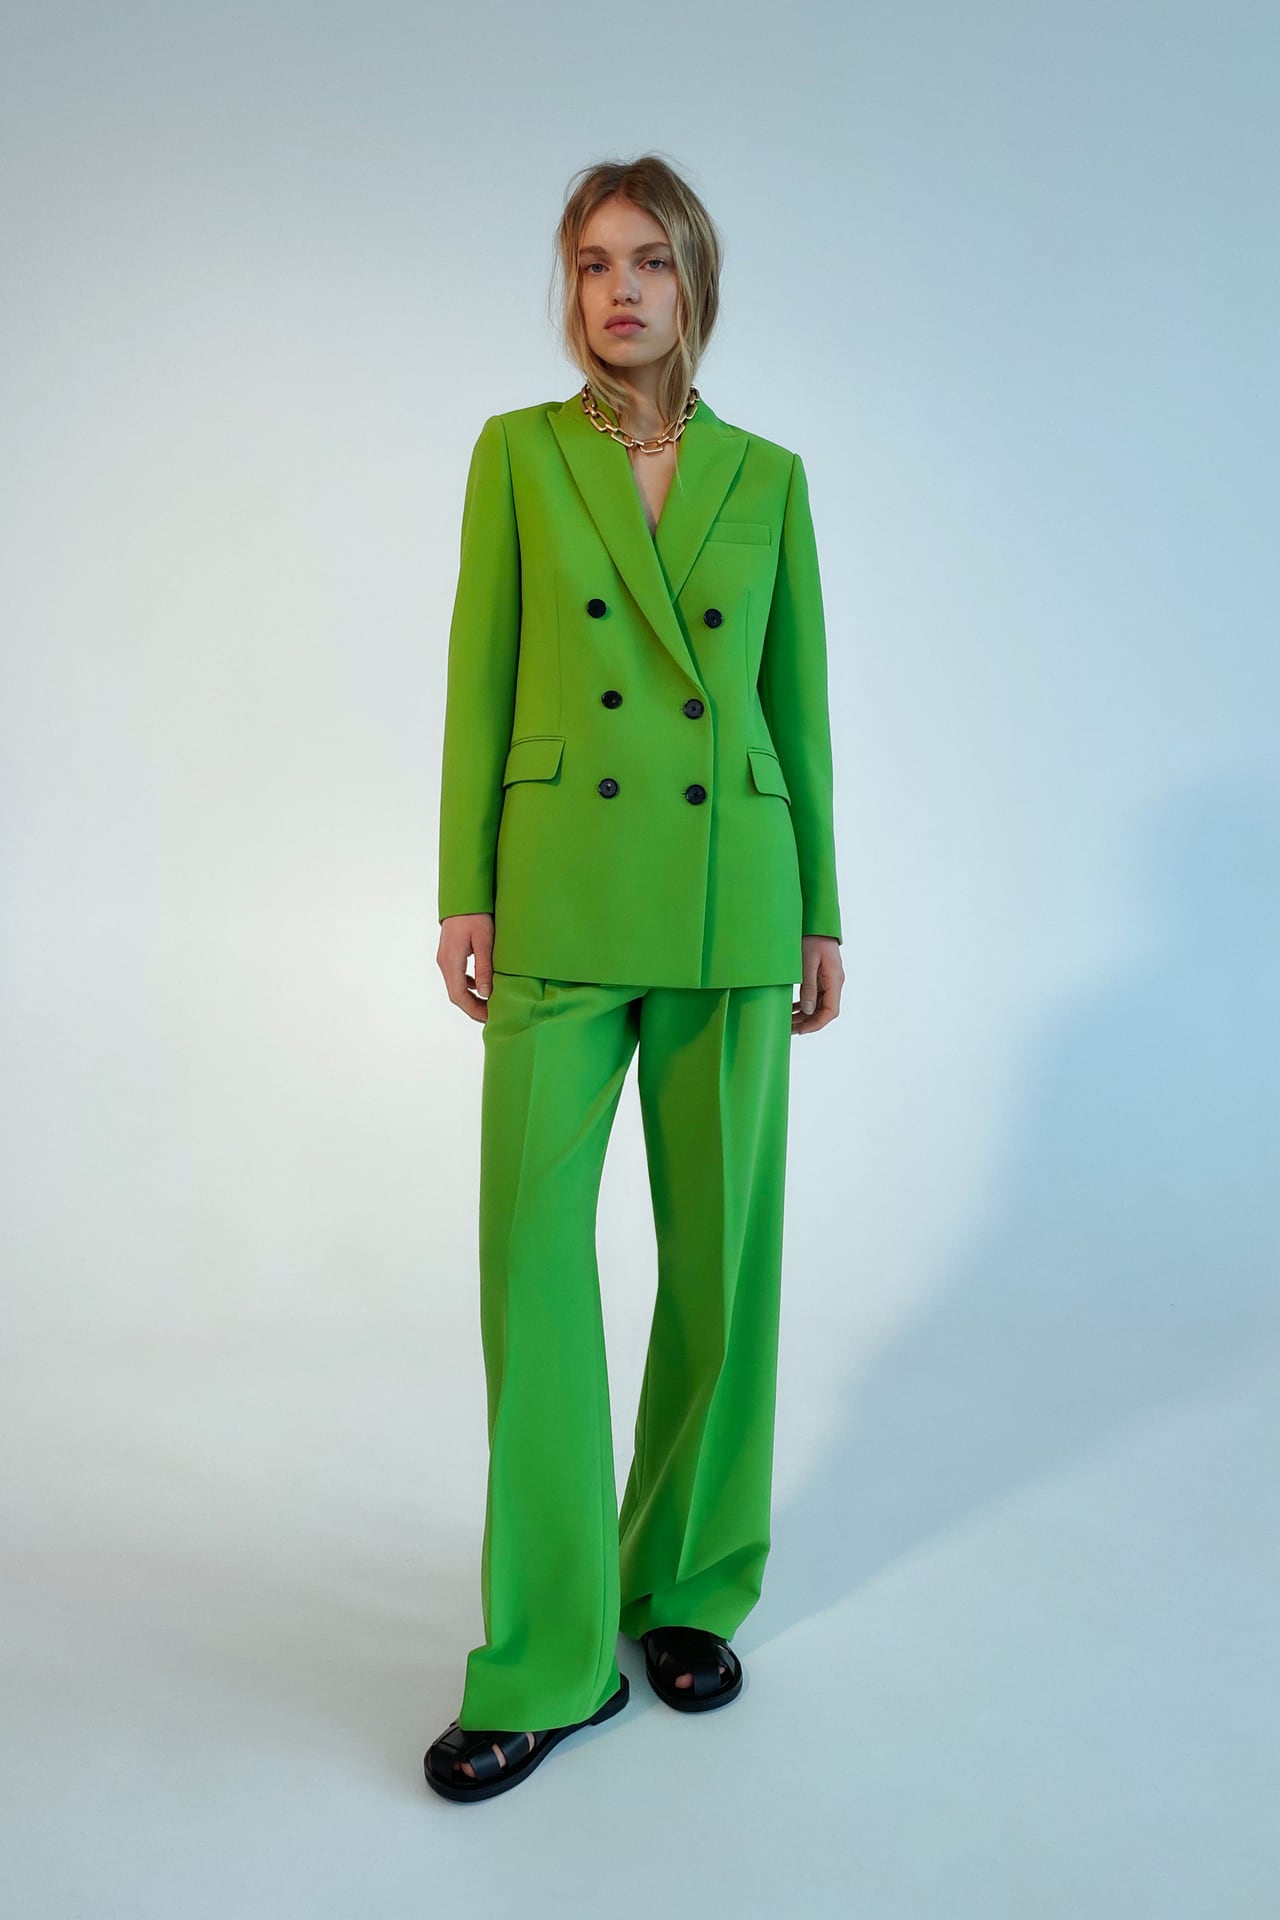 Zara's Spring 2022 Collection Is Full ...